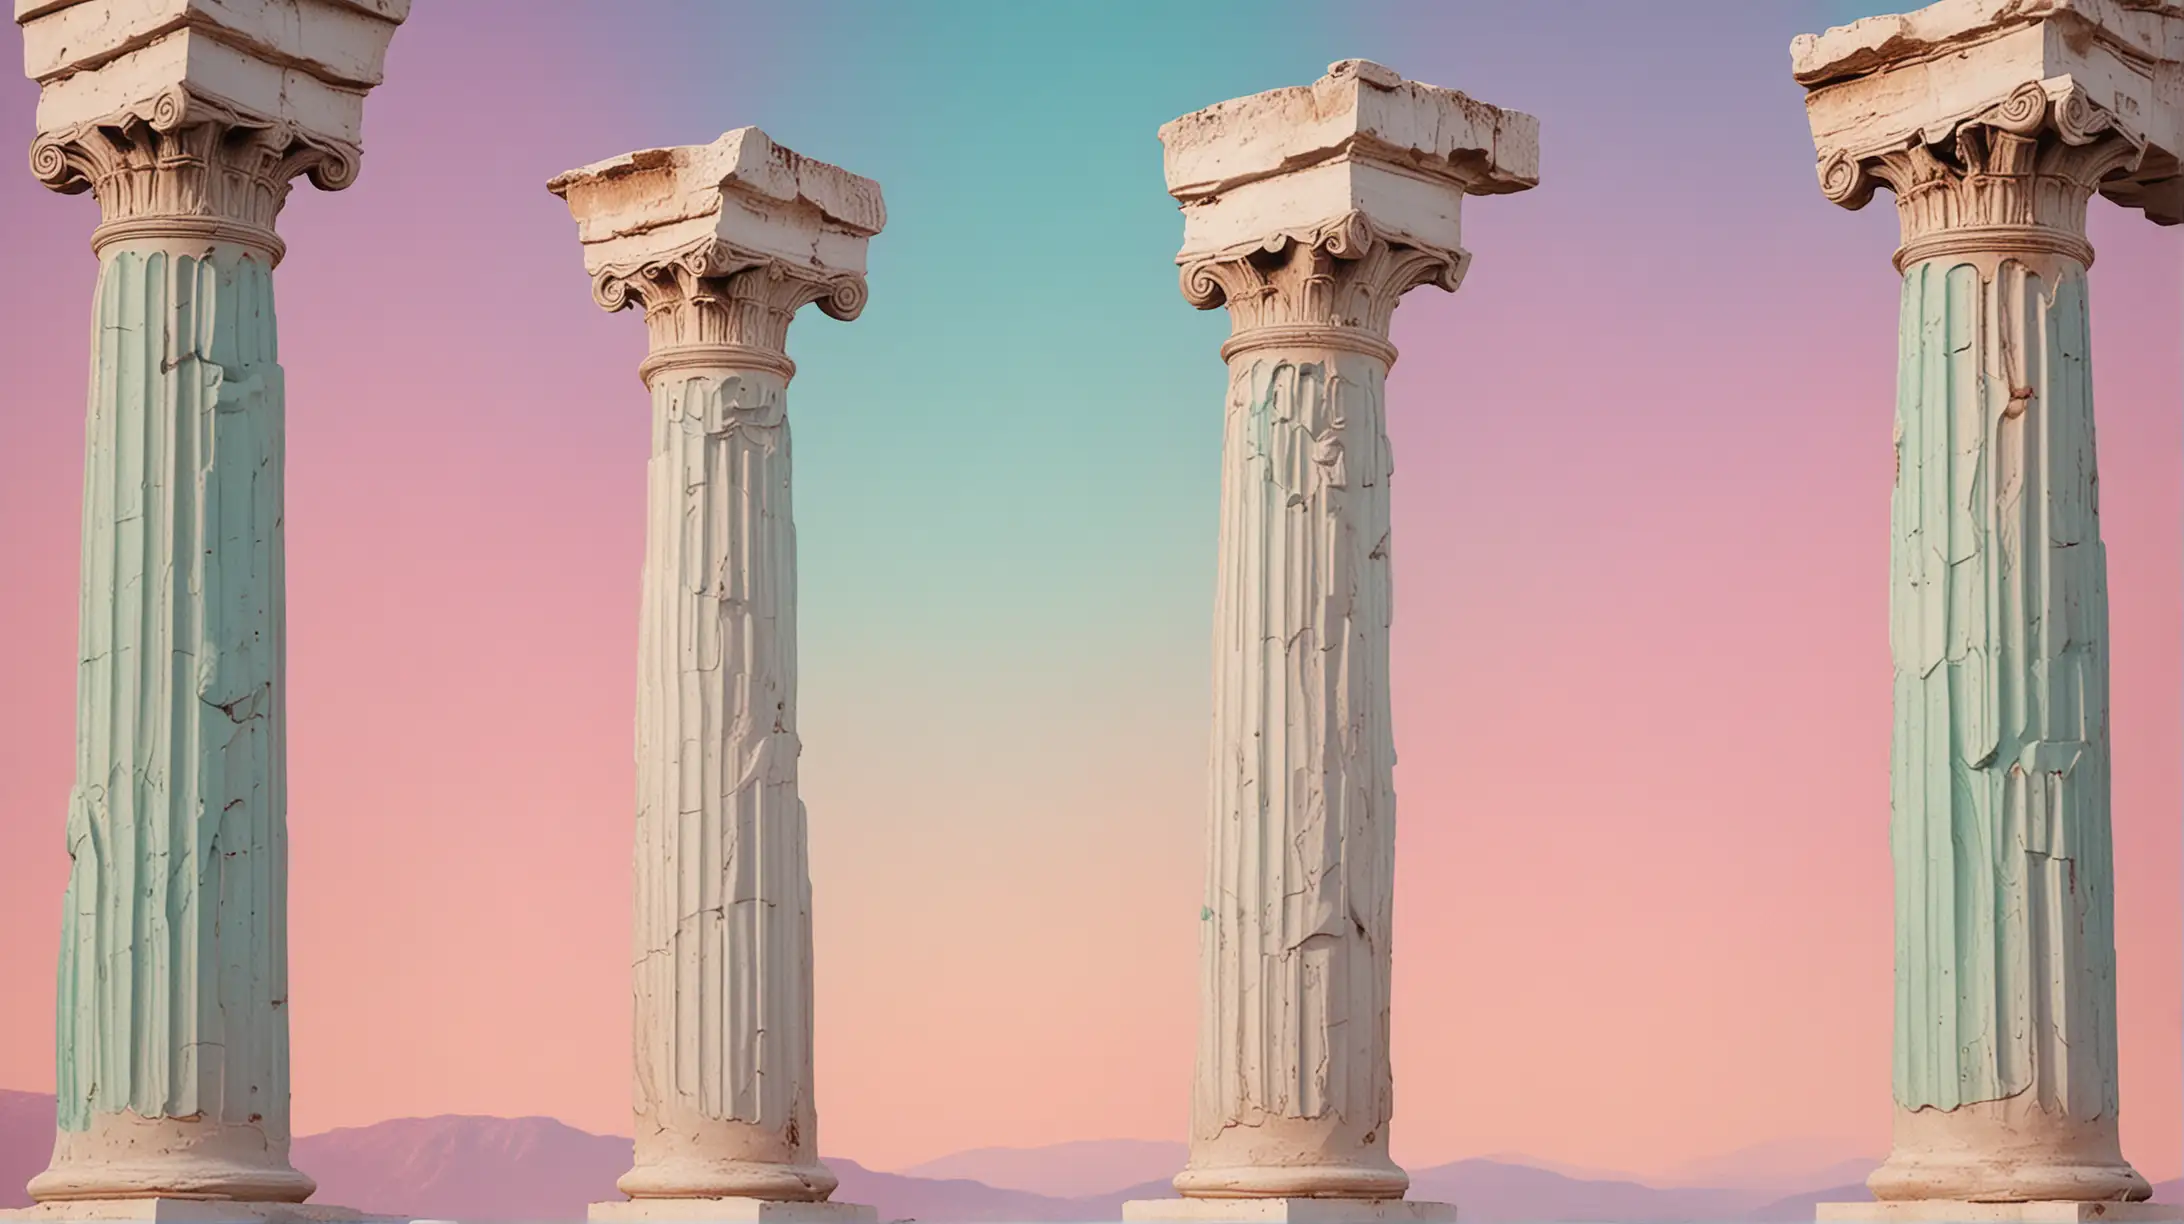 generate 4 greek pillars with a vibrant pastel color background